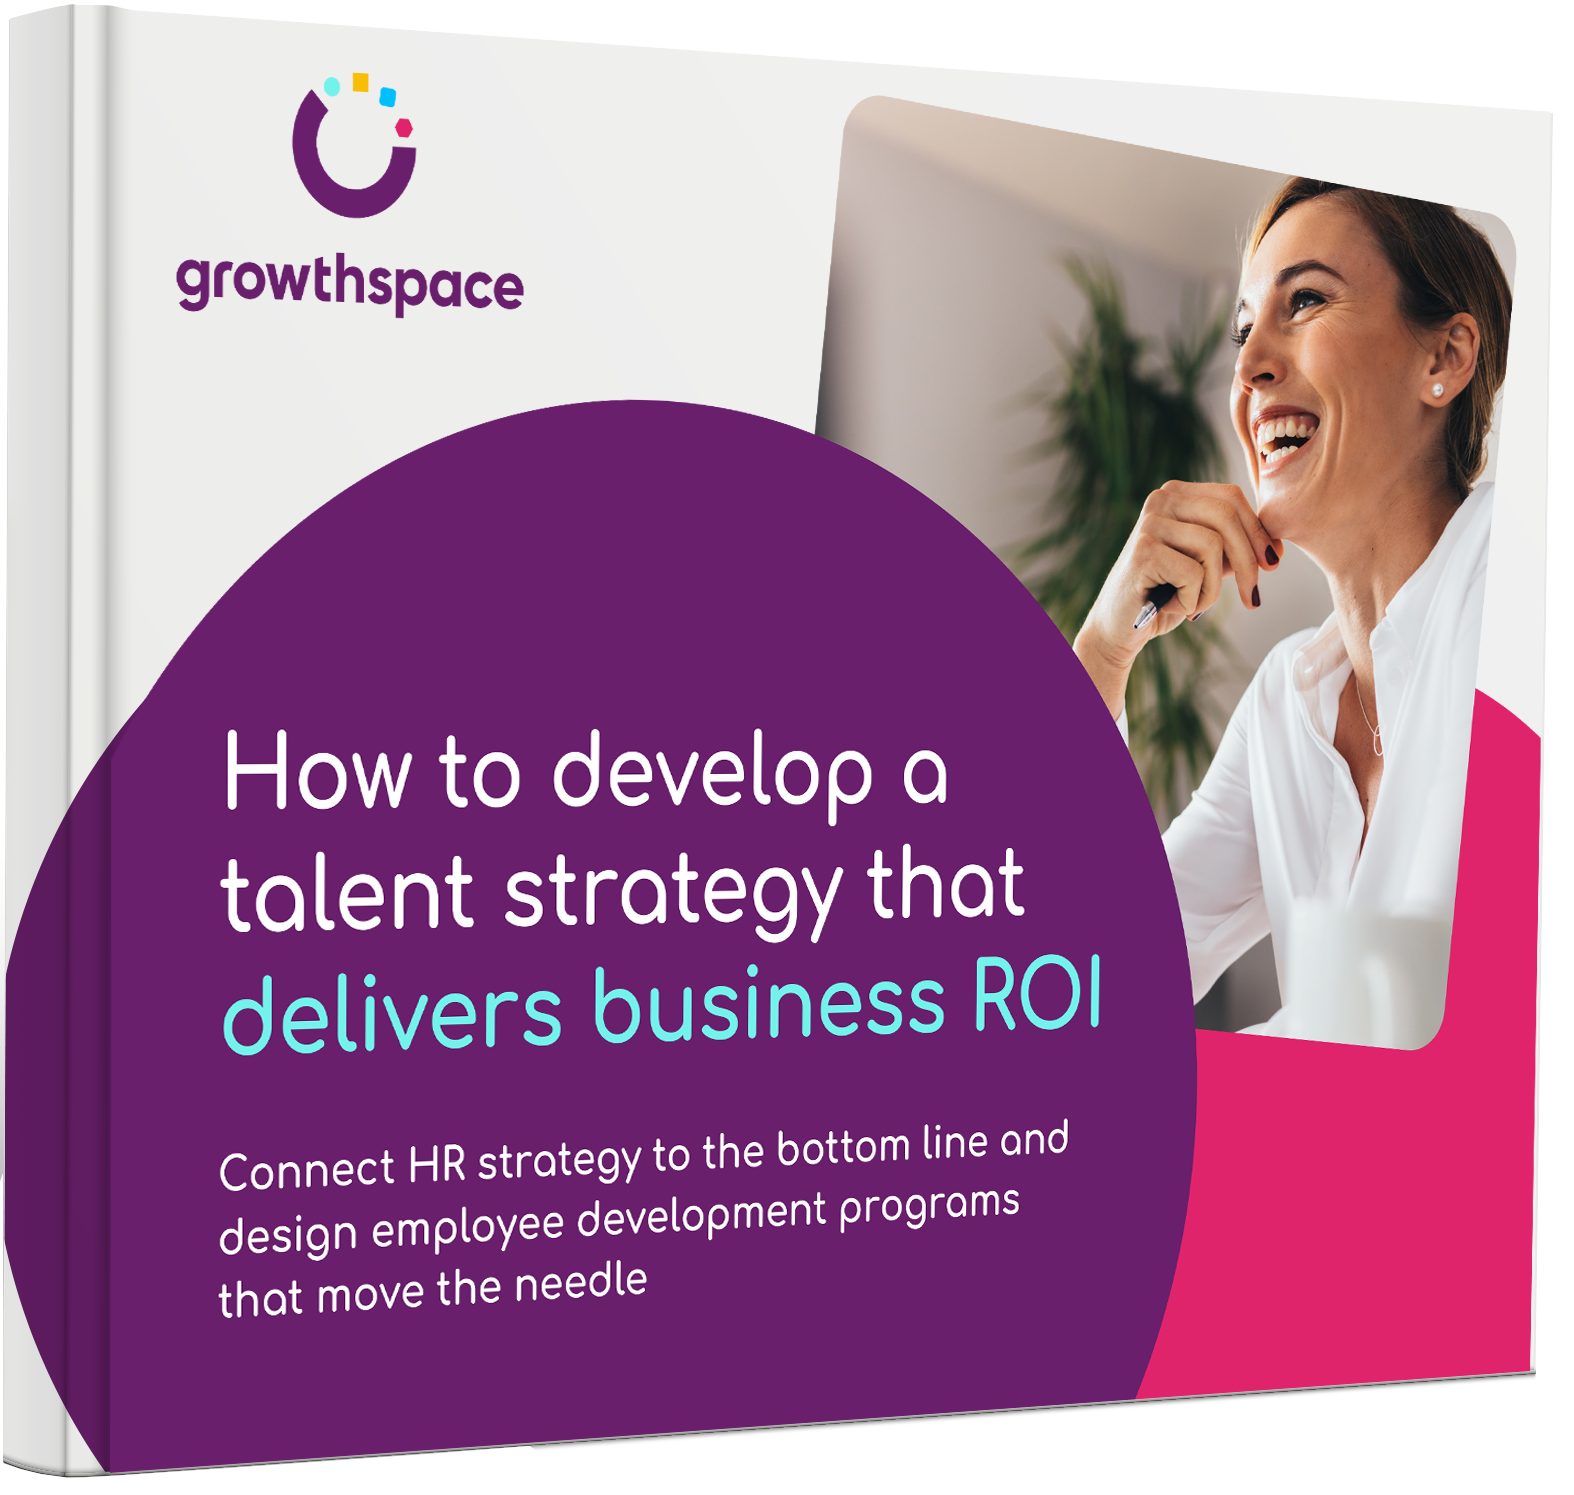 How to Develop a Talent Strategy that Delivers Business ROI-image copy (1)